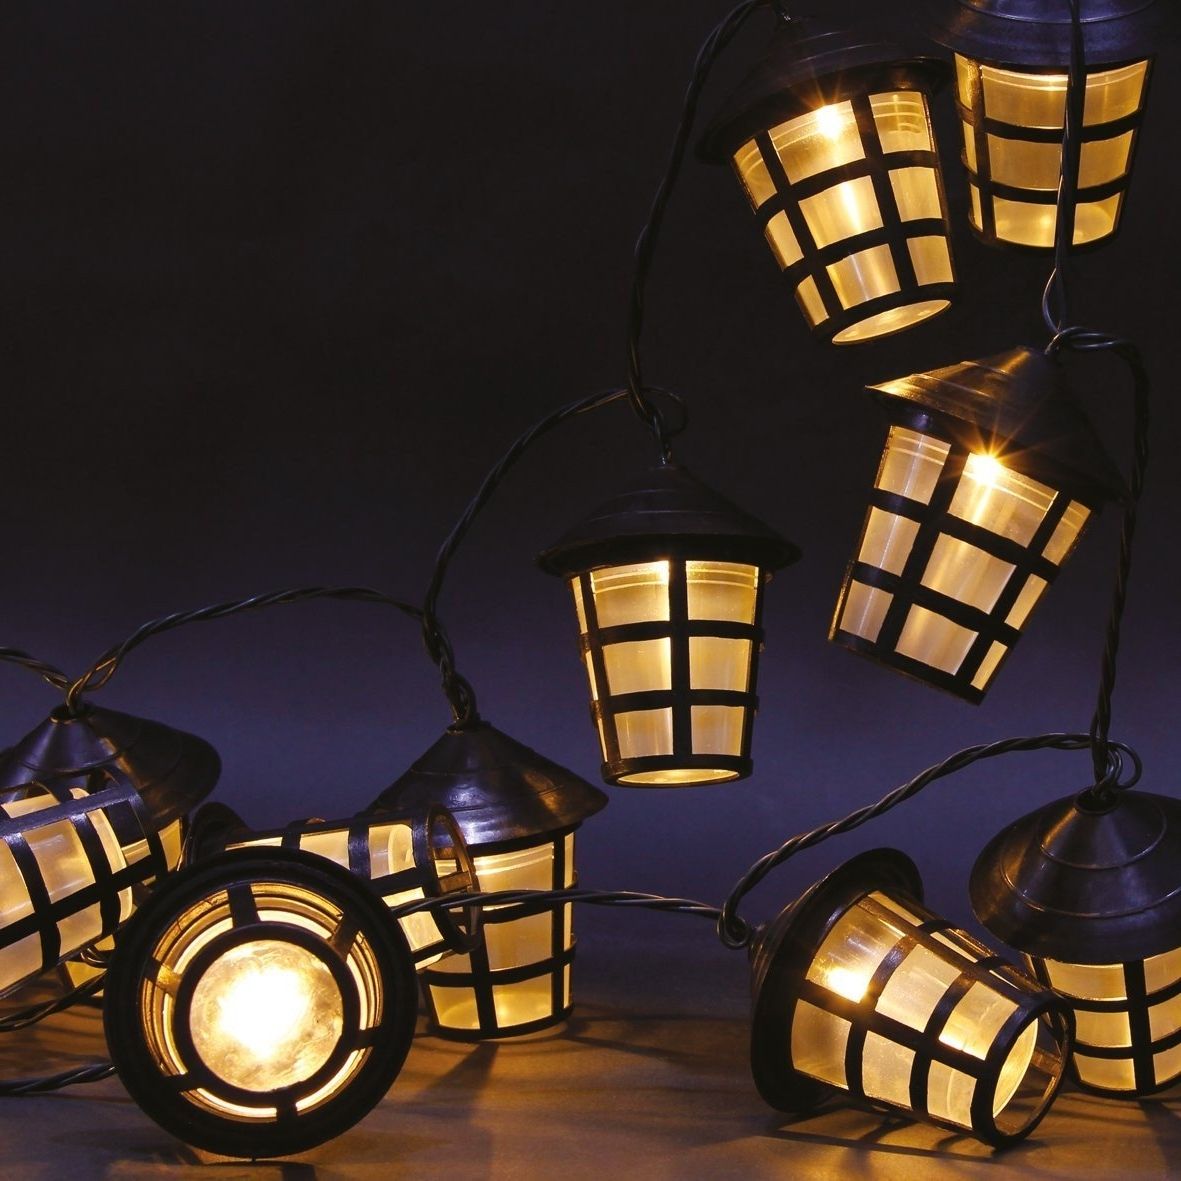 Outdoor Lanterns On String Pertaining To Most Recently Released 70 Warm White Led Garden Lantern String Lights (View 14 of 20)